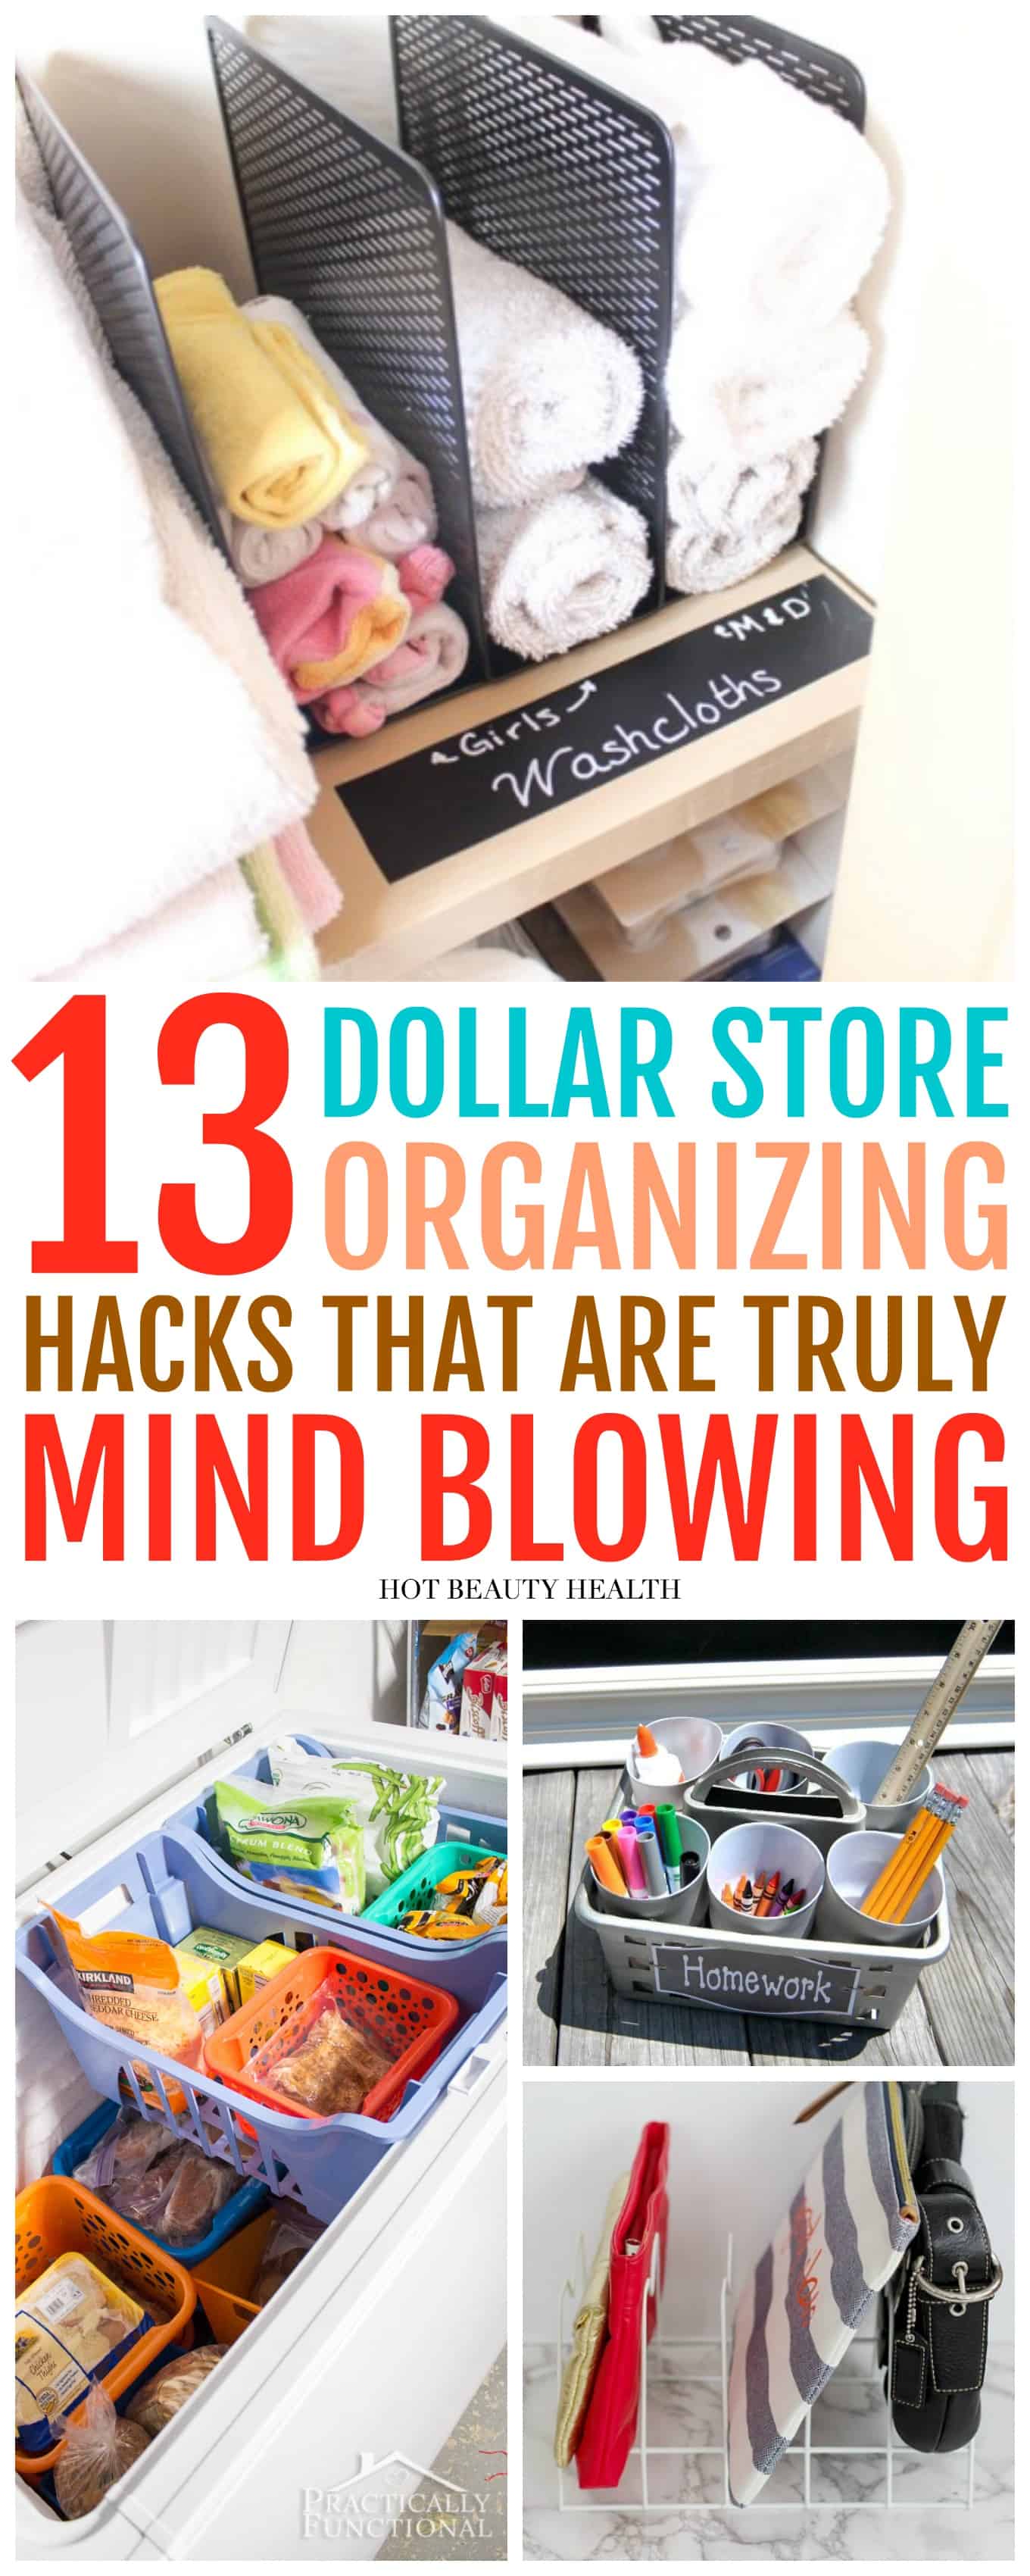 13 Dollar Store Organizing Hacks That Are So Clever Hot Beauty Health,2 Bedroom Apartments For Rent Edmonton West